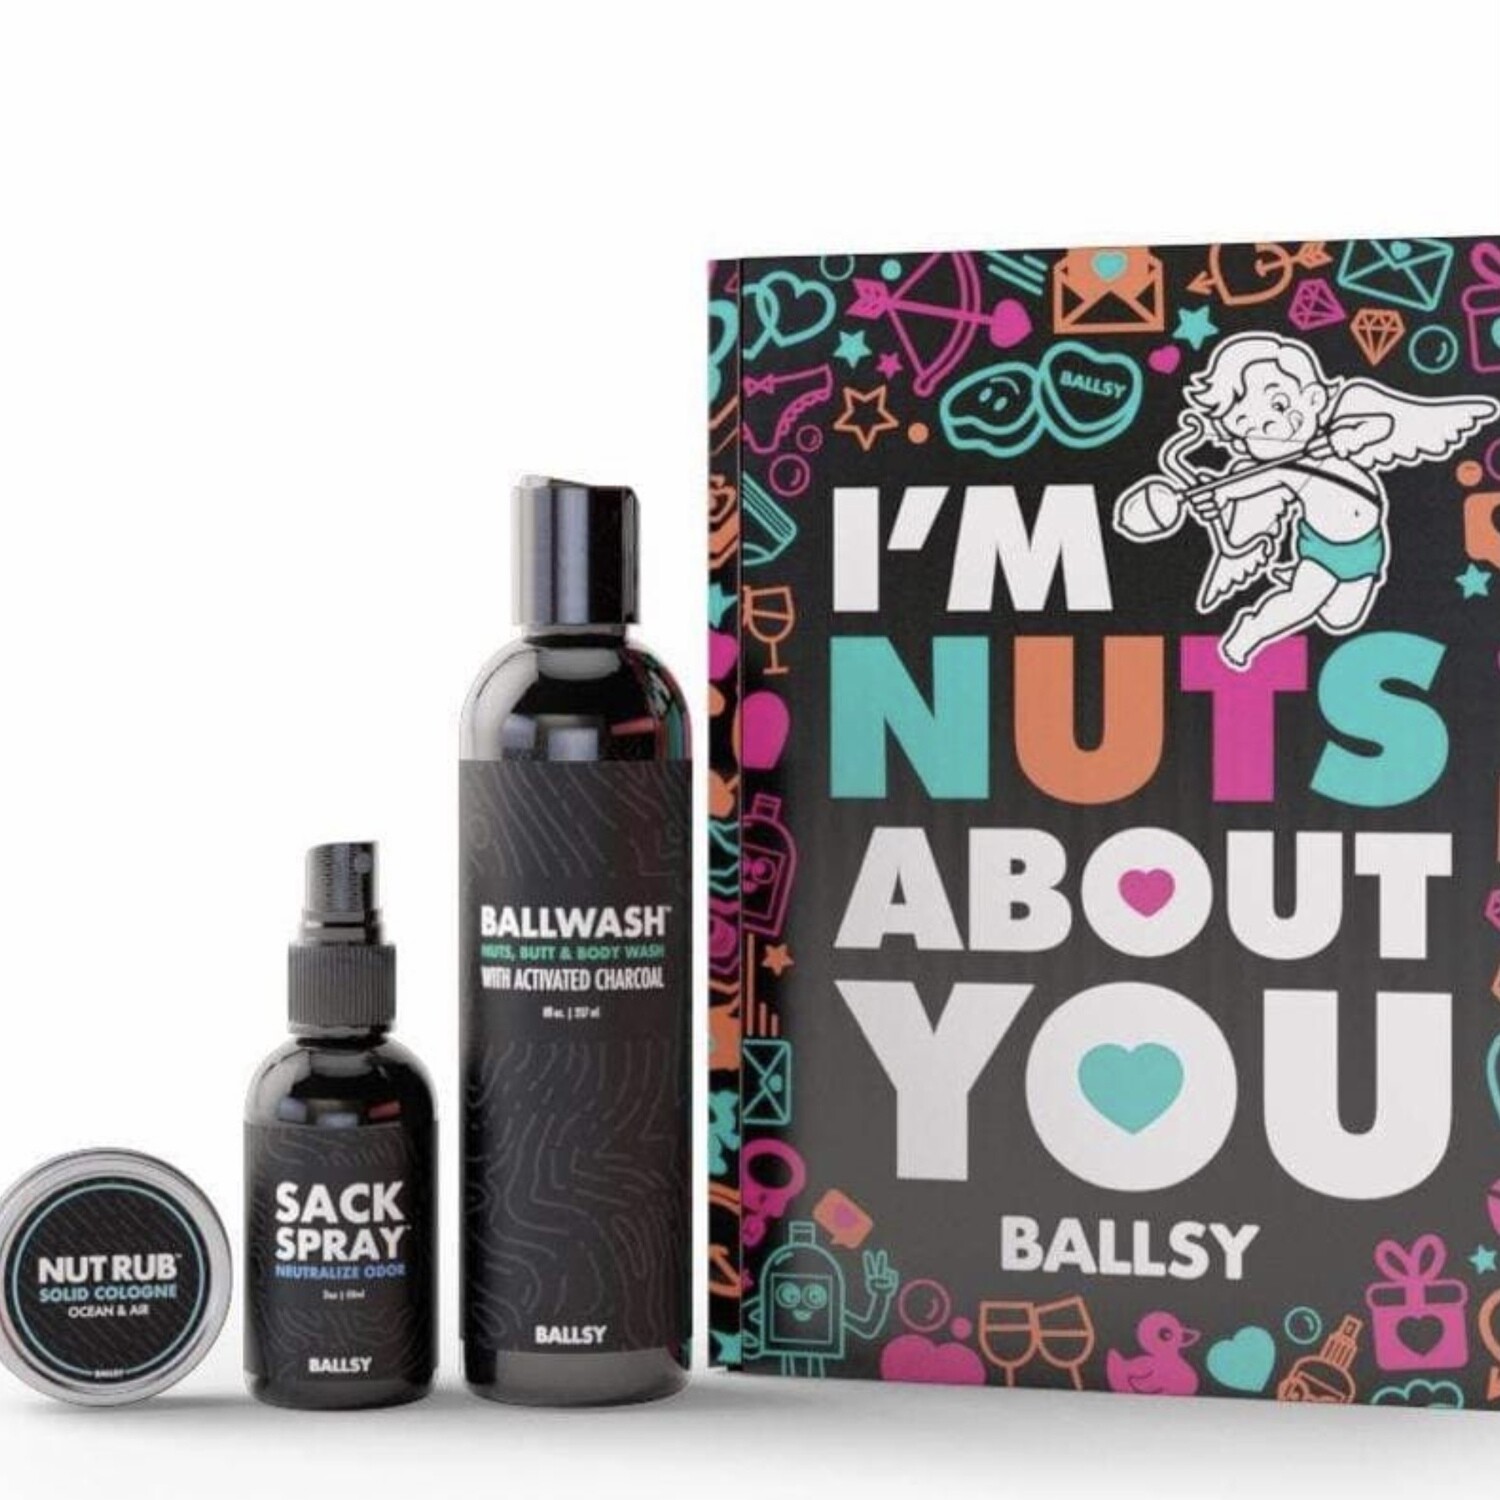 Nuts About You Sack Pack by Ballsy